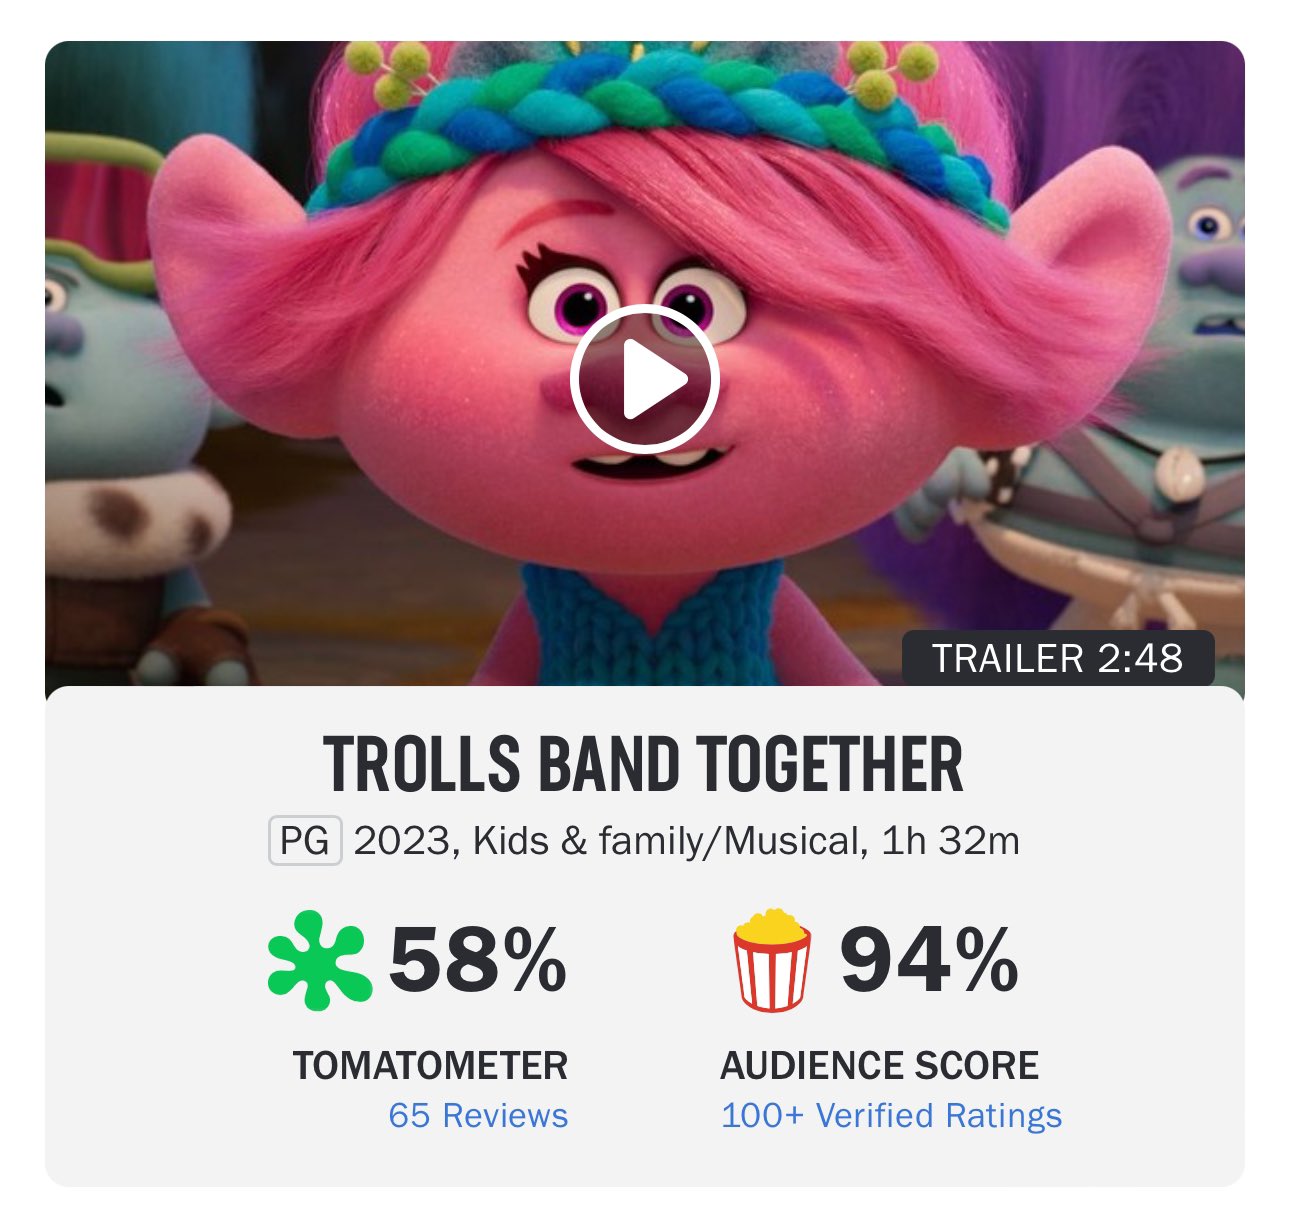 Sonic currently has a 94% verified audience score on Rotten